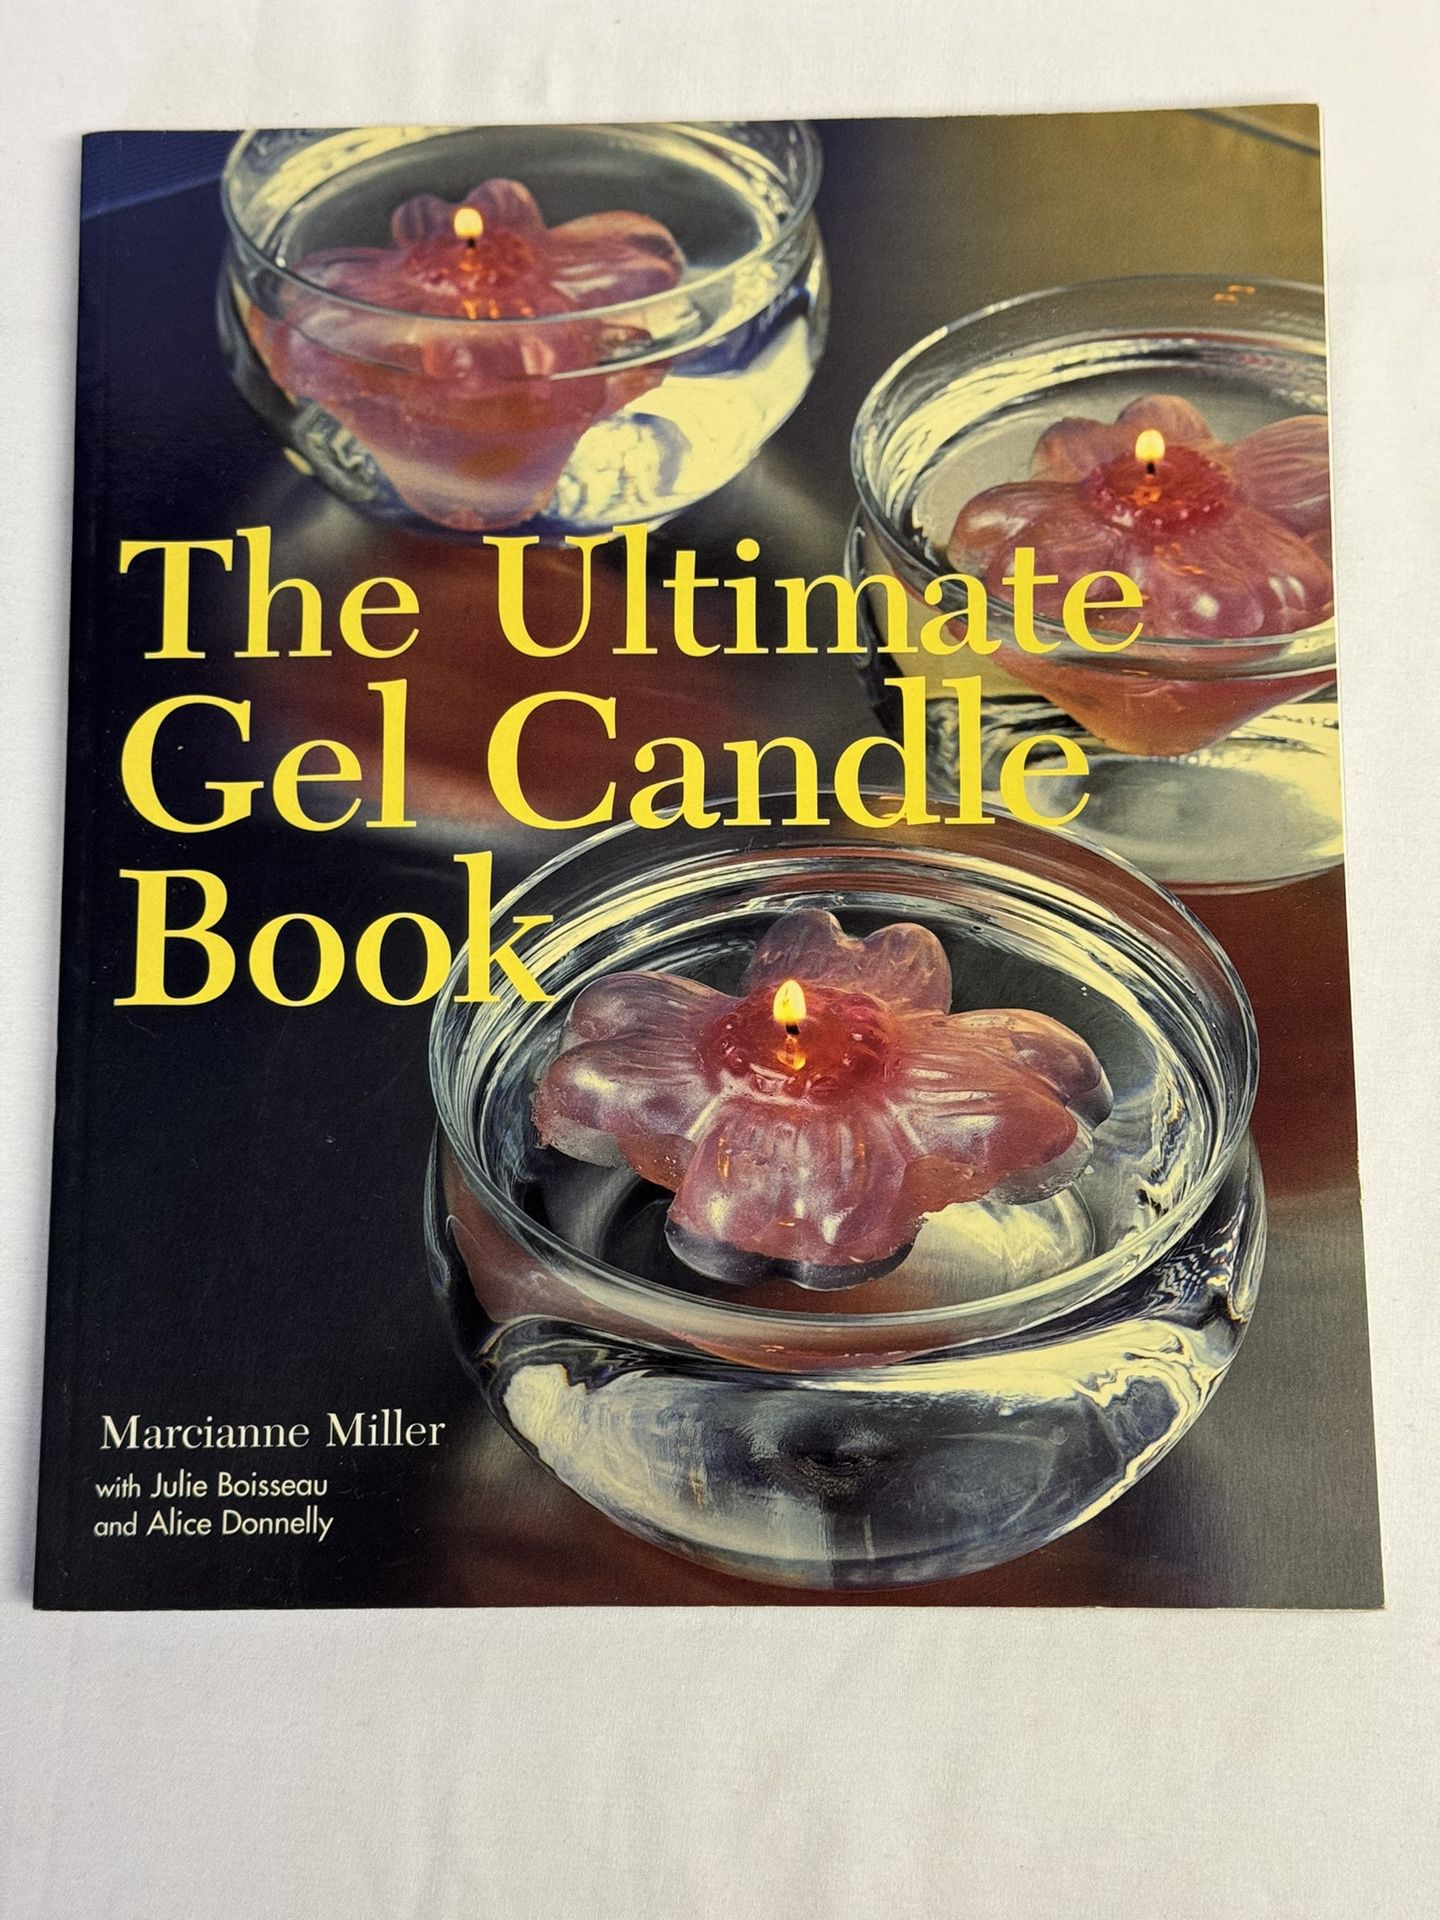 The Ultimate Gel Candle Book by Julie Boisseau, Marcianne Miller and Alice...